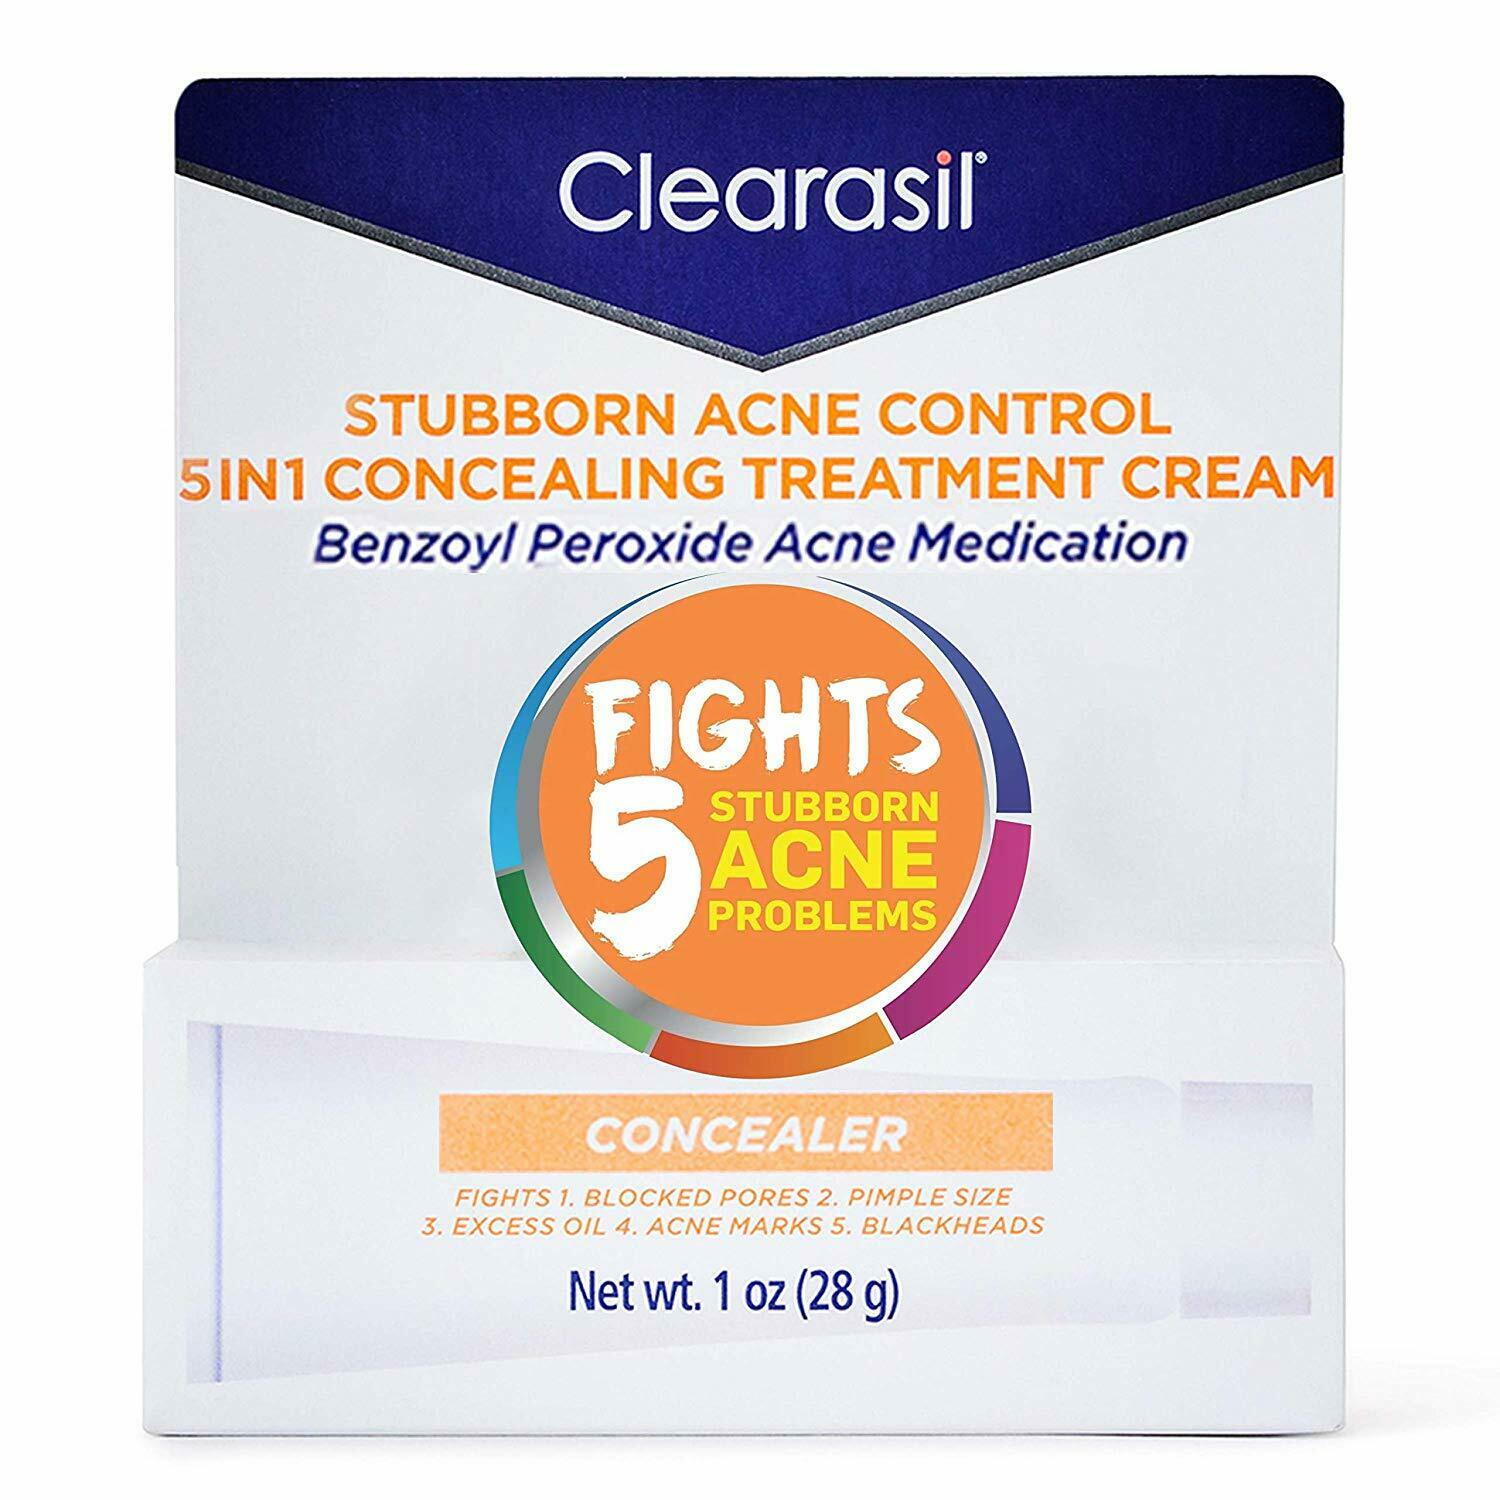 Clearasil Stubborn Acne Control 5in1 Concealing Treatment Cream, 1 Oz.